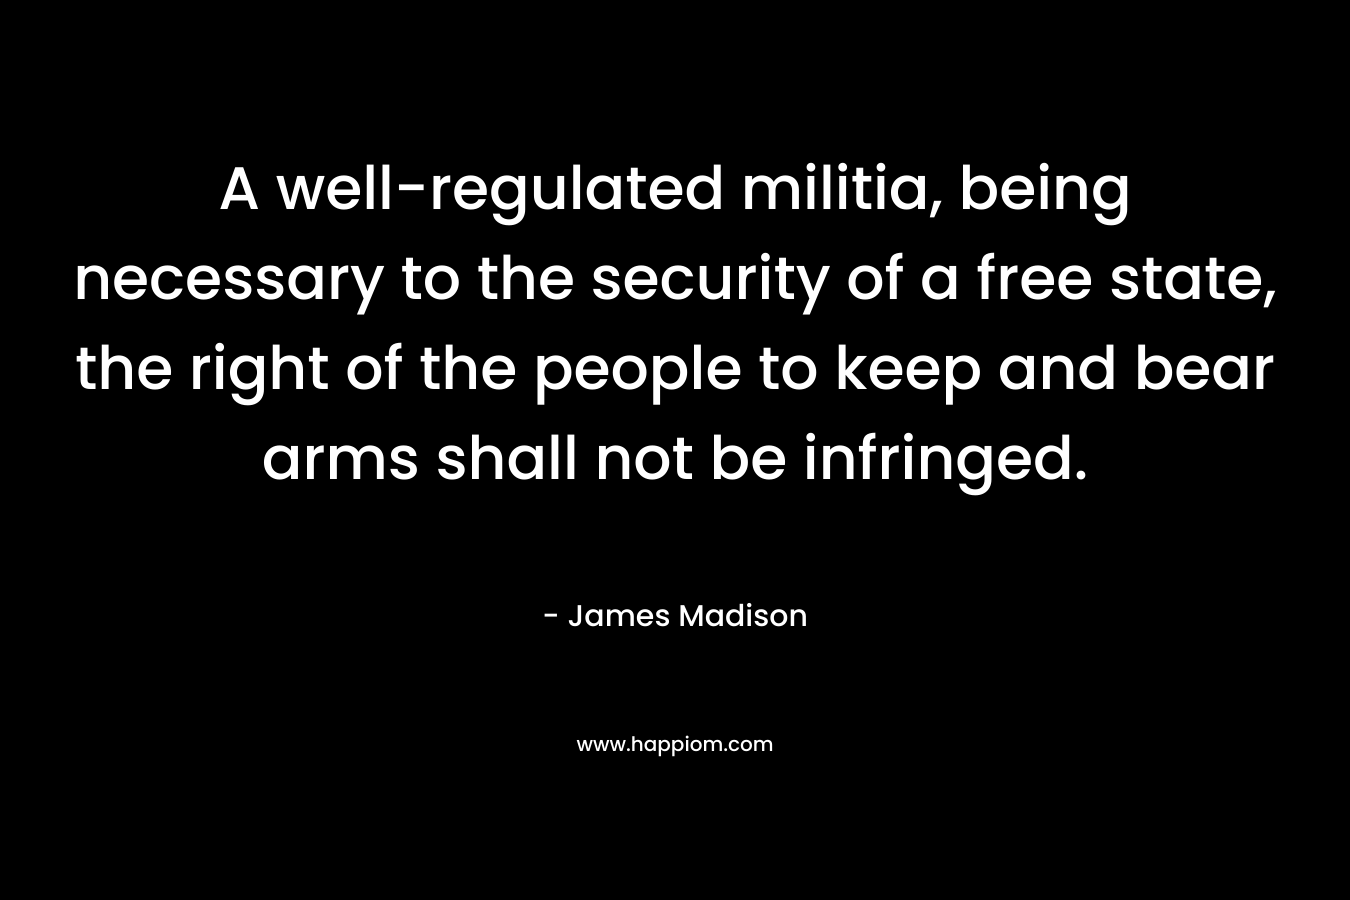 A well-regulated militia, being necessary to the security of a free state, the right of the people to keep and bear arms shall not be infringed.